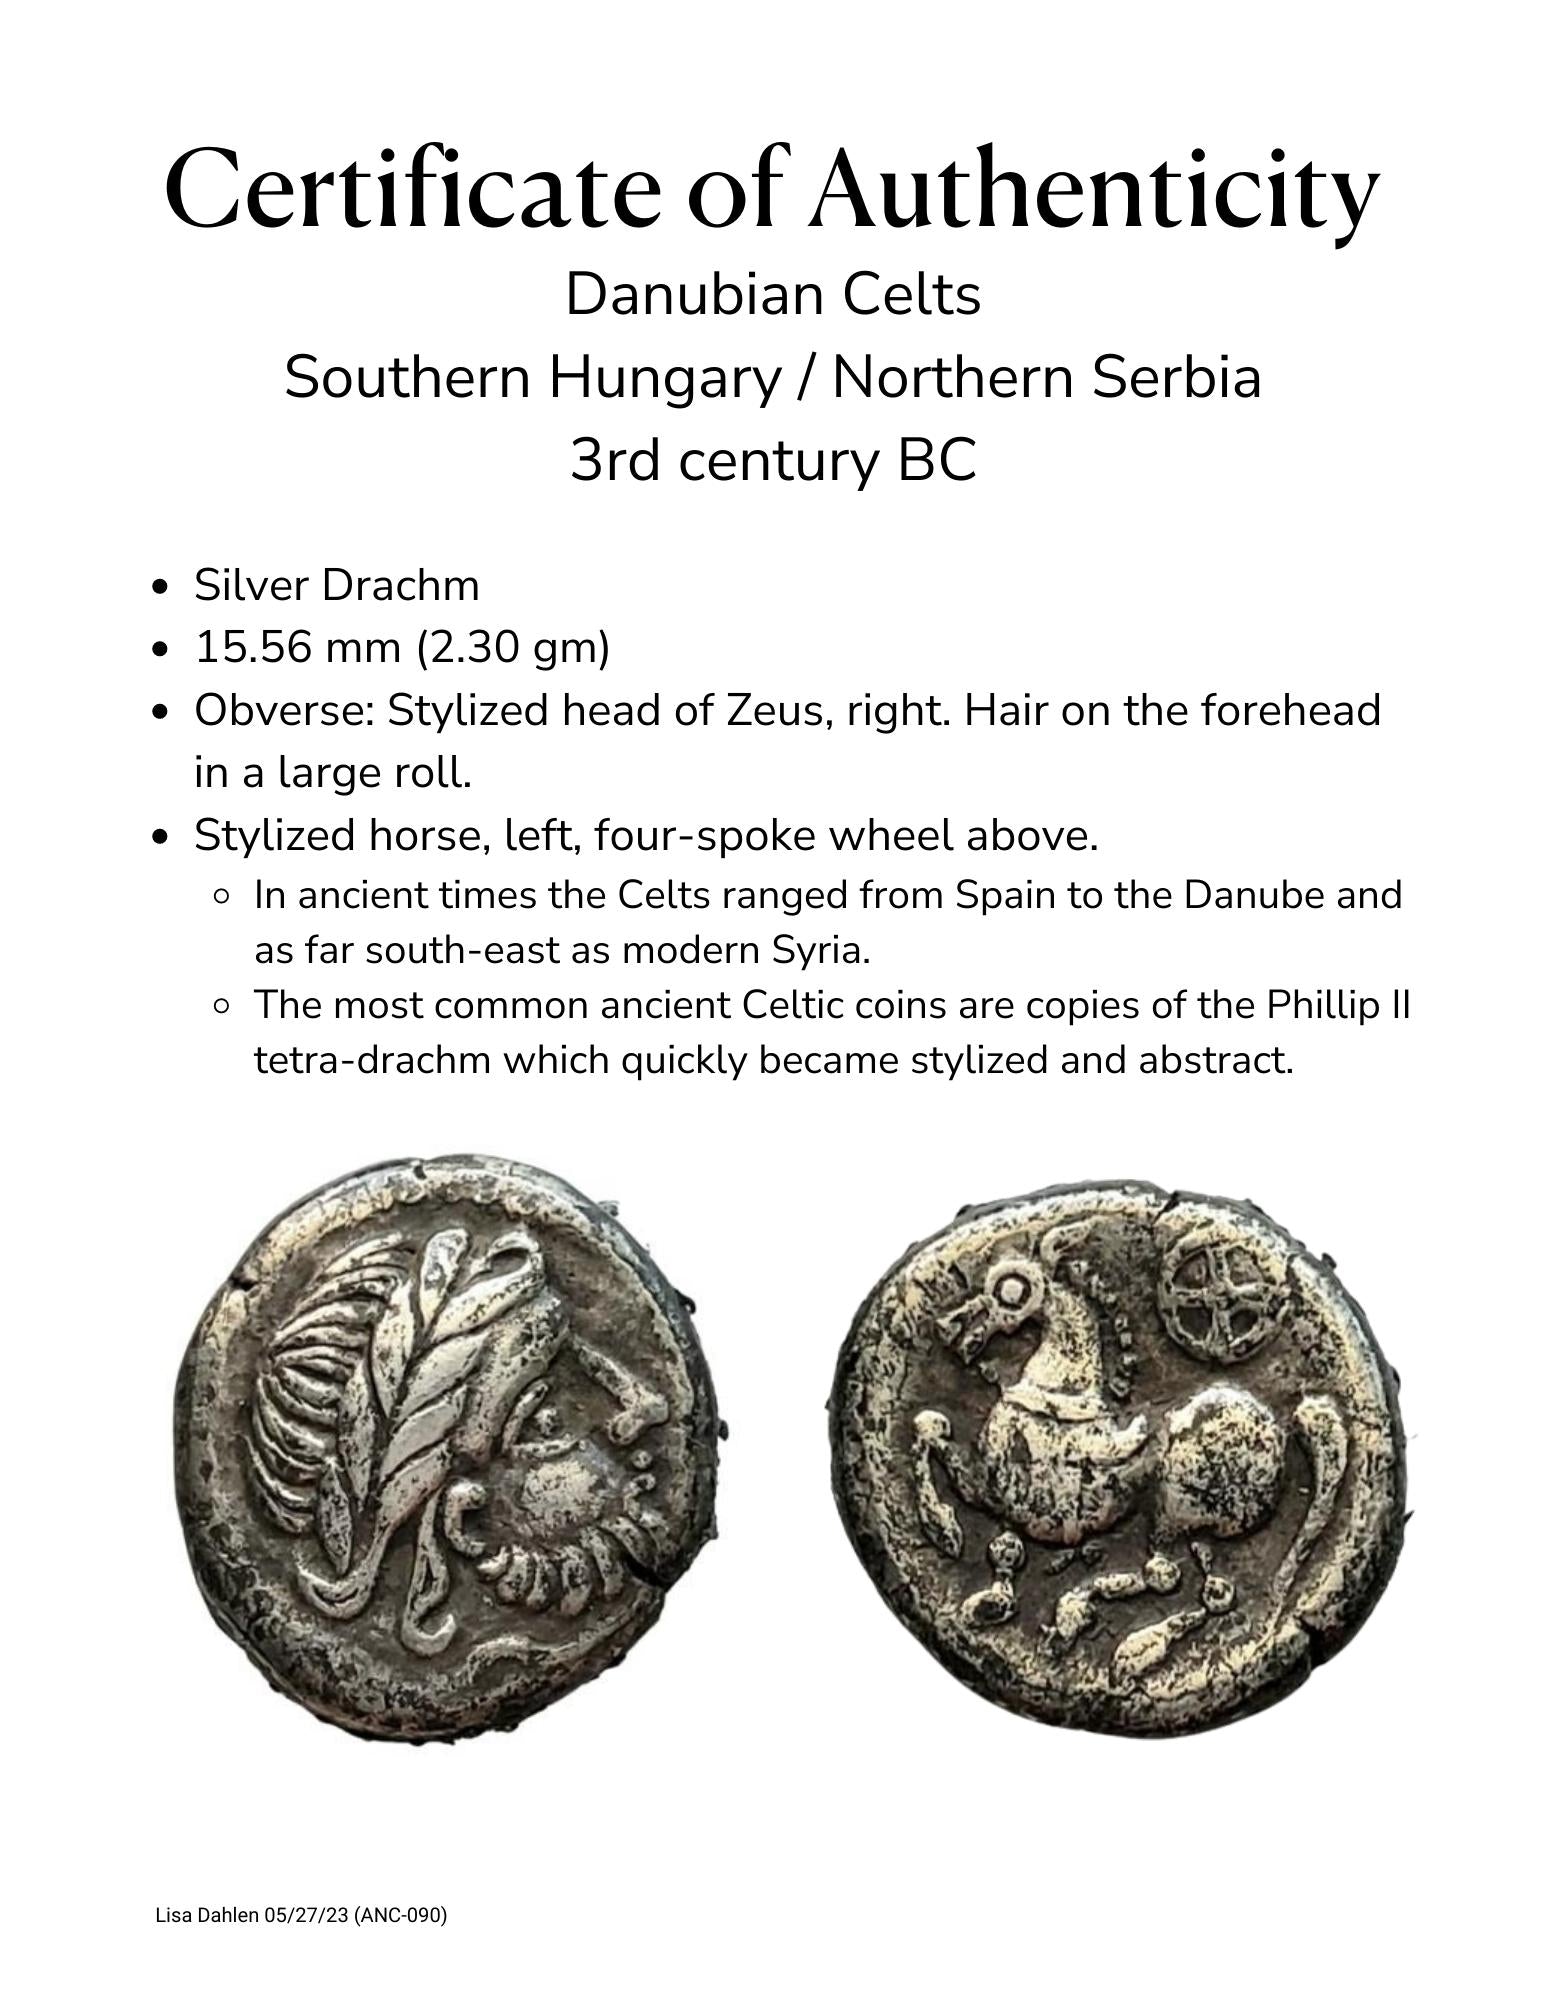 Certificate of authenticity of ancient Celtic coin from 3rd century BC.  Danubian Celts.  Head of Zeus and a stylized horse.